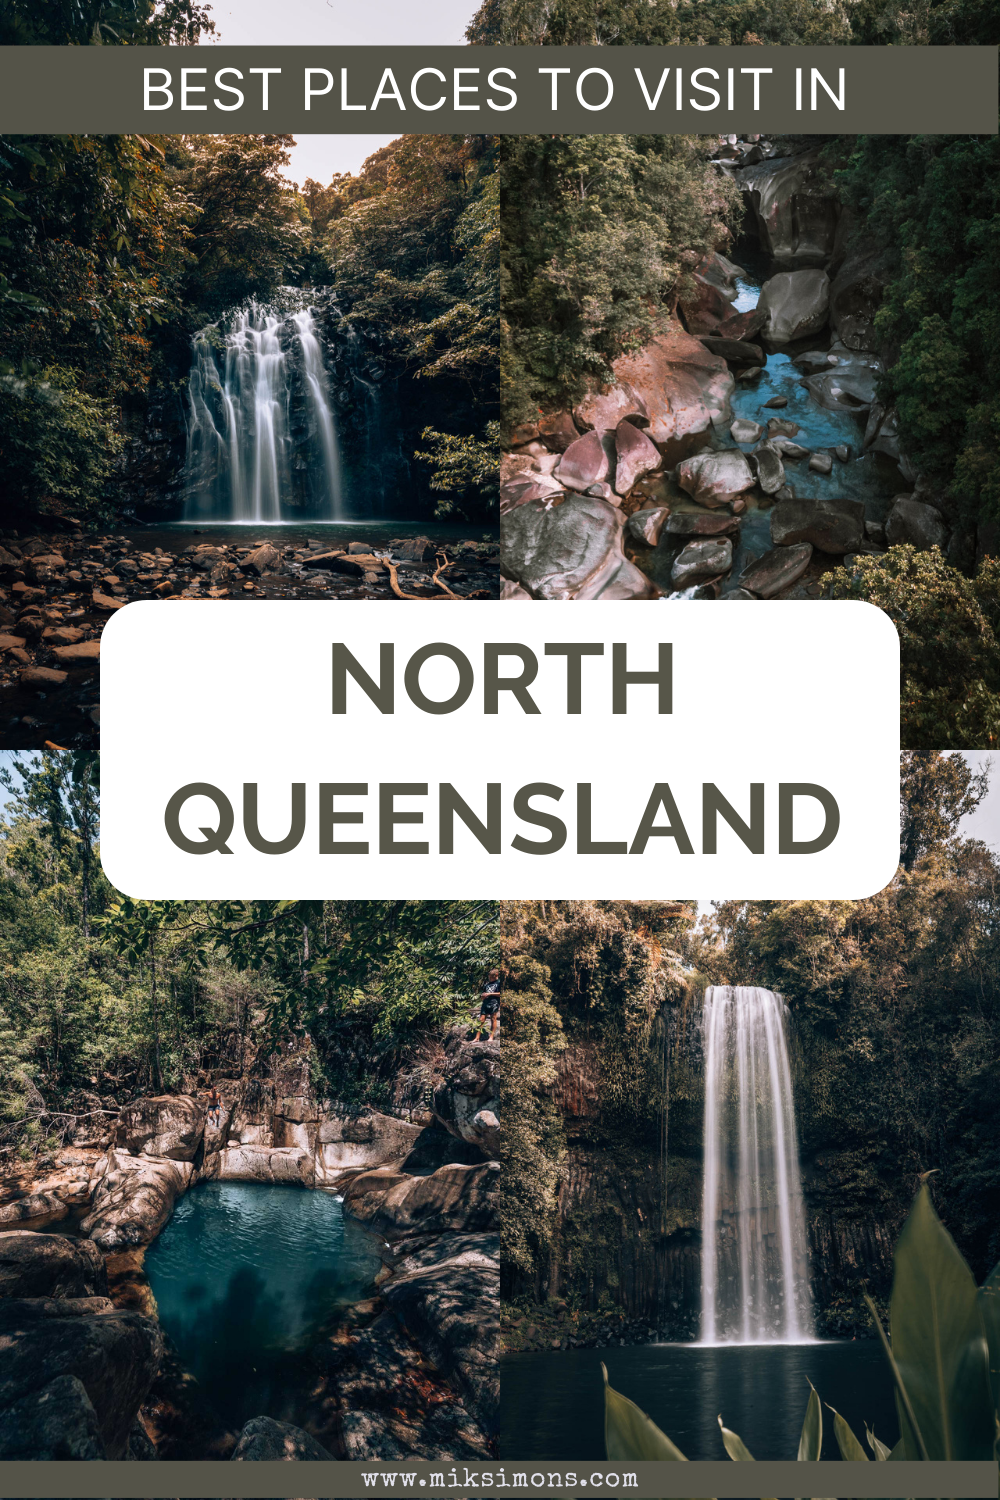 TROPICAL NORTH QUEENSLAND - 17 AWESOME PLACES TO VISIT2